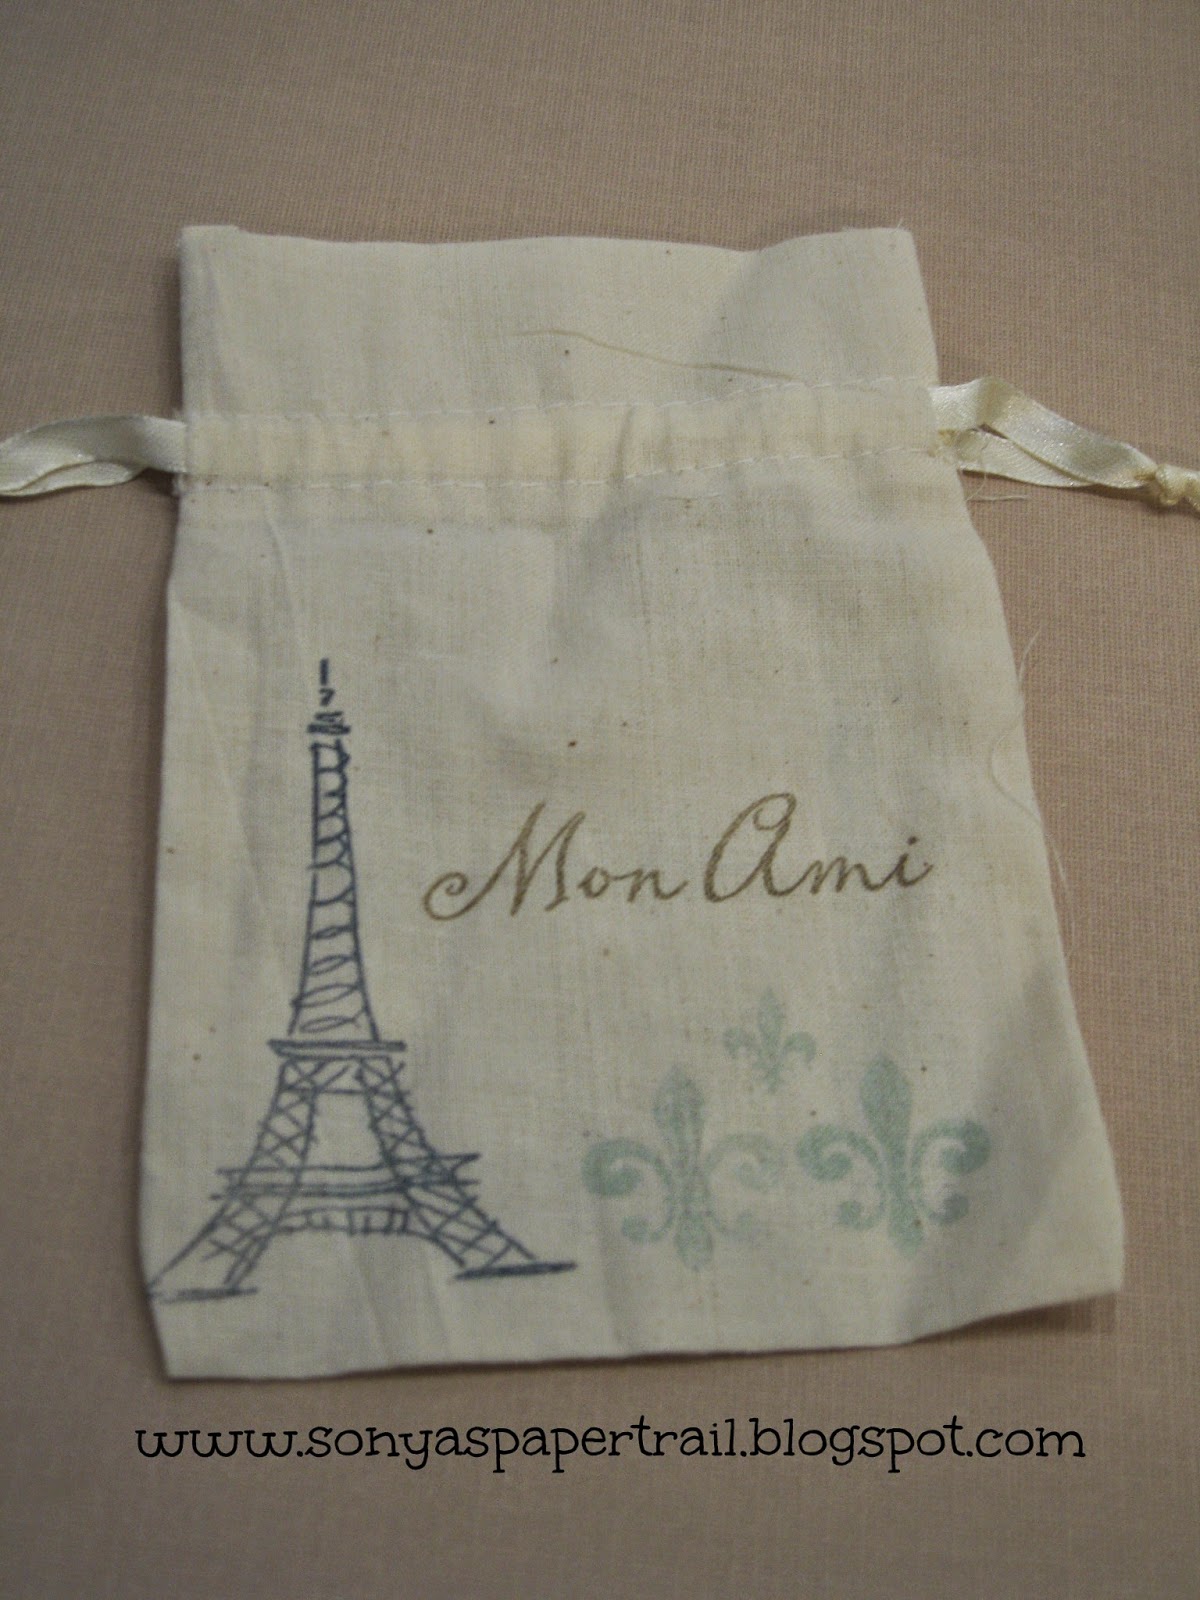 She's a Sassy Lady: Parisian Themed Gift and Stamped Gift Bag